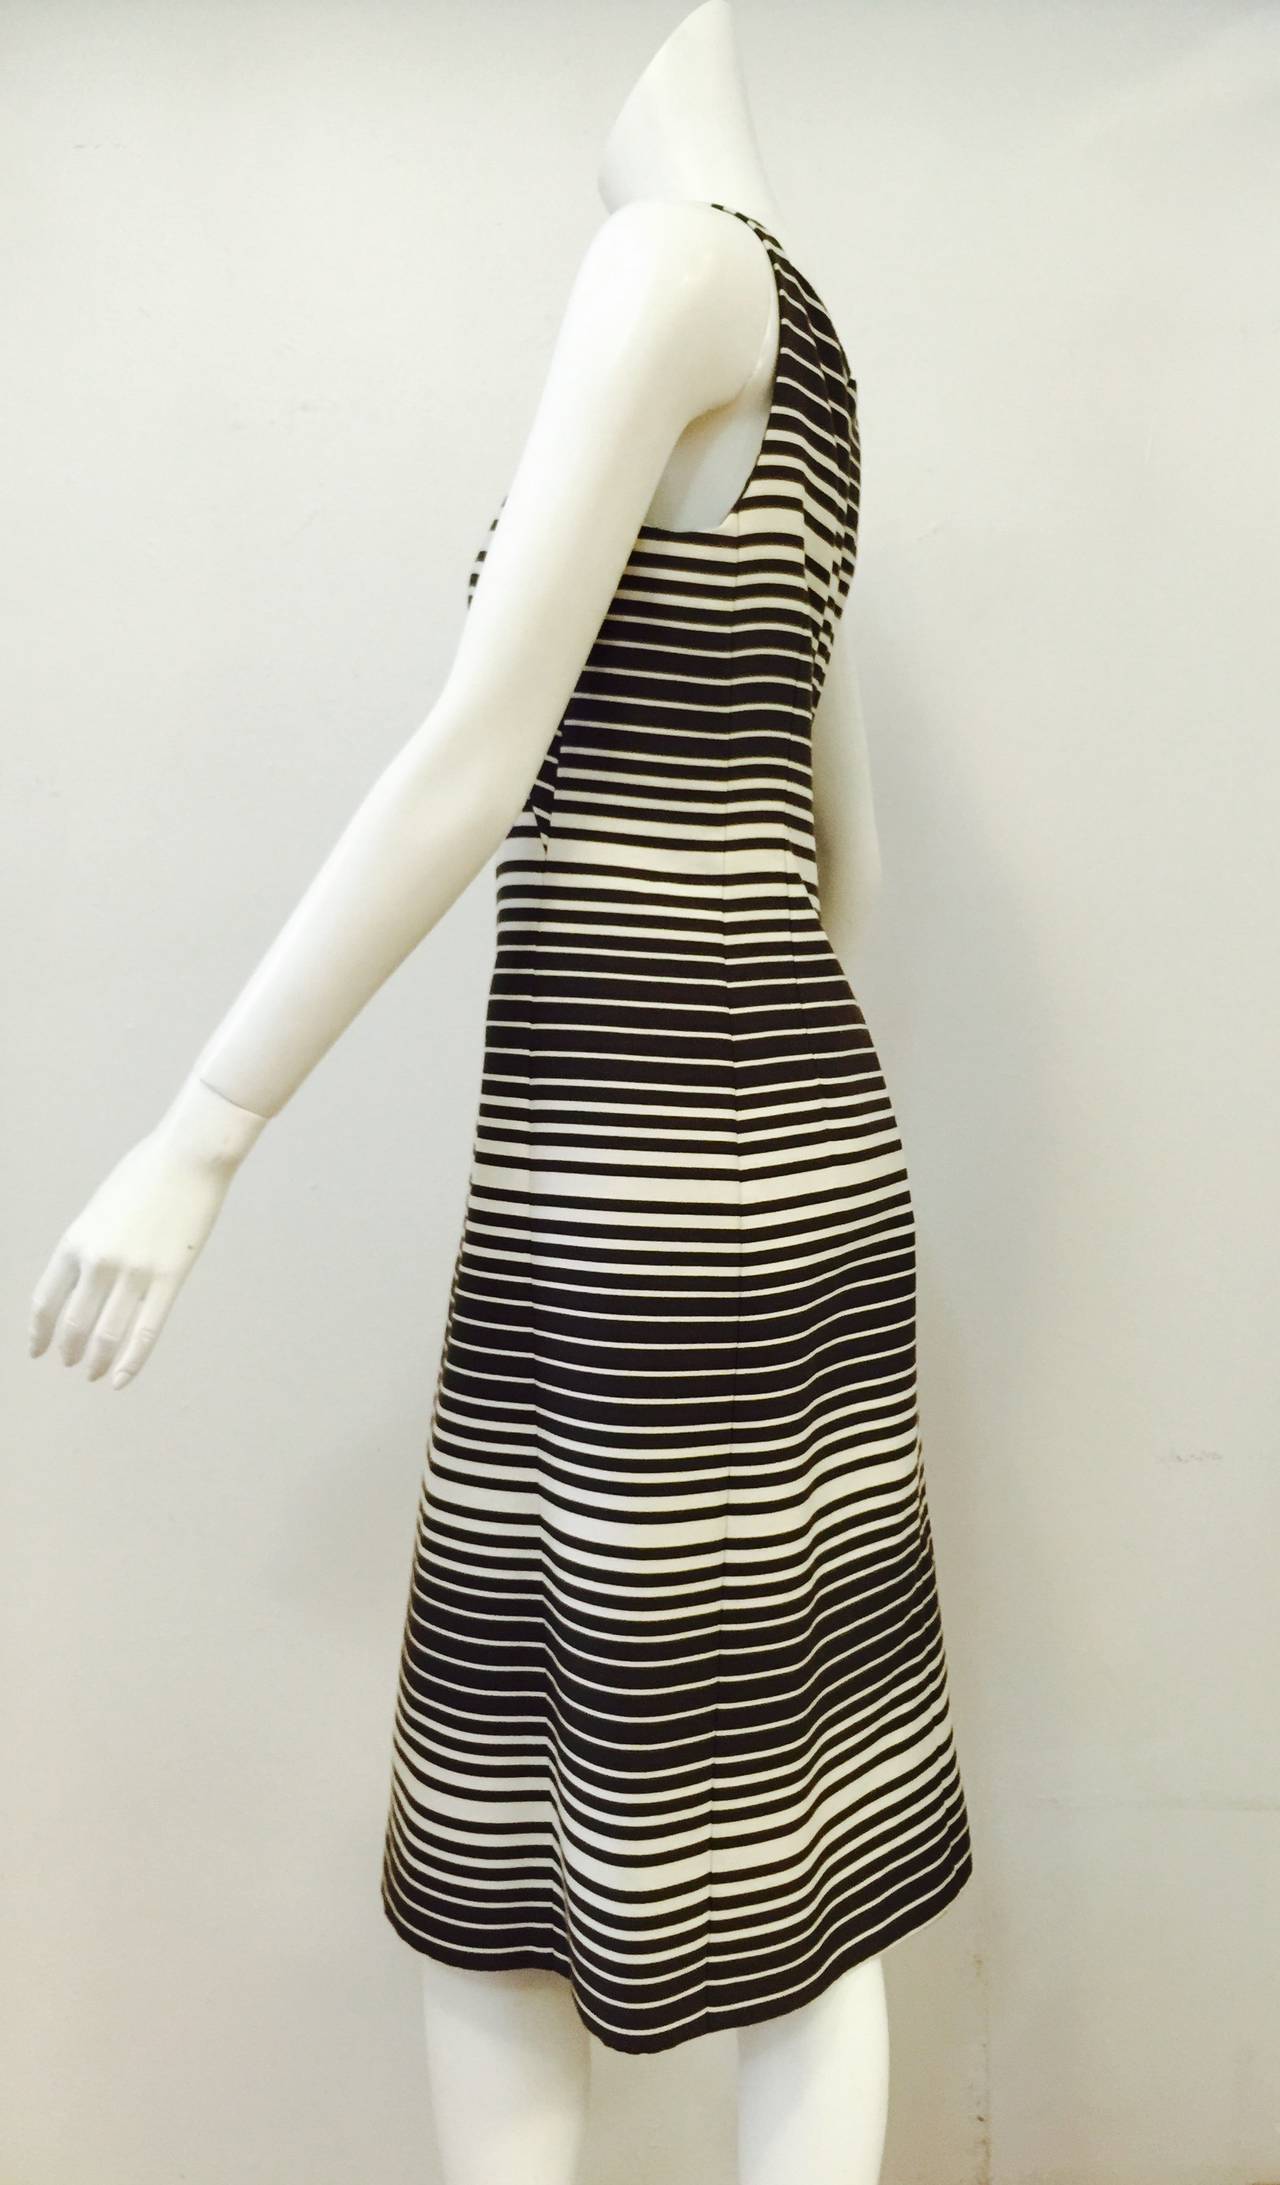 Akris Punto for Bergdorf Goodman Striped Sleeveless Shift is sensible chic at its best!  Fully lined dress features comfortable a-line silhouette, tank straps, square neckline, graduated horizontal stripes in chocolate and cream.  Slightly nipped